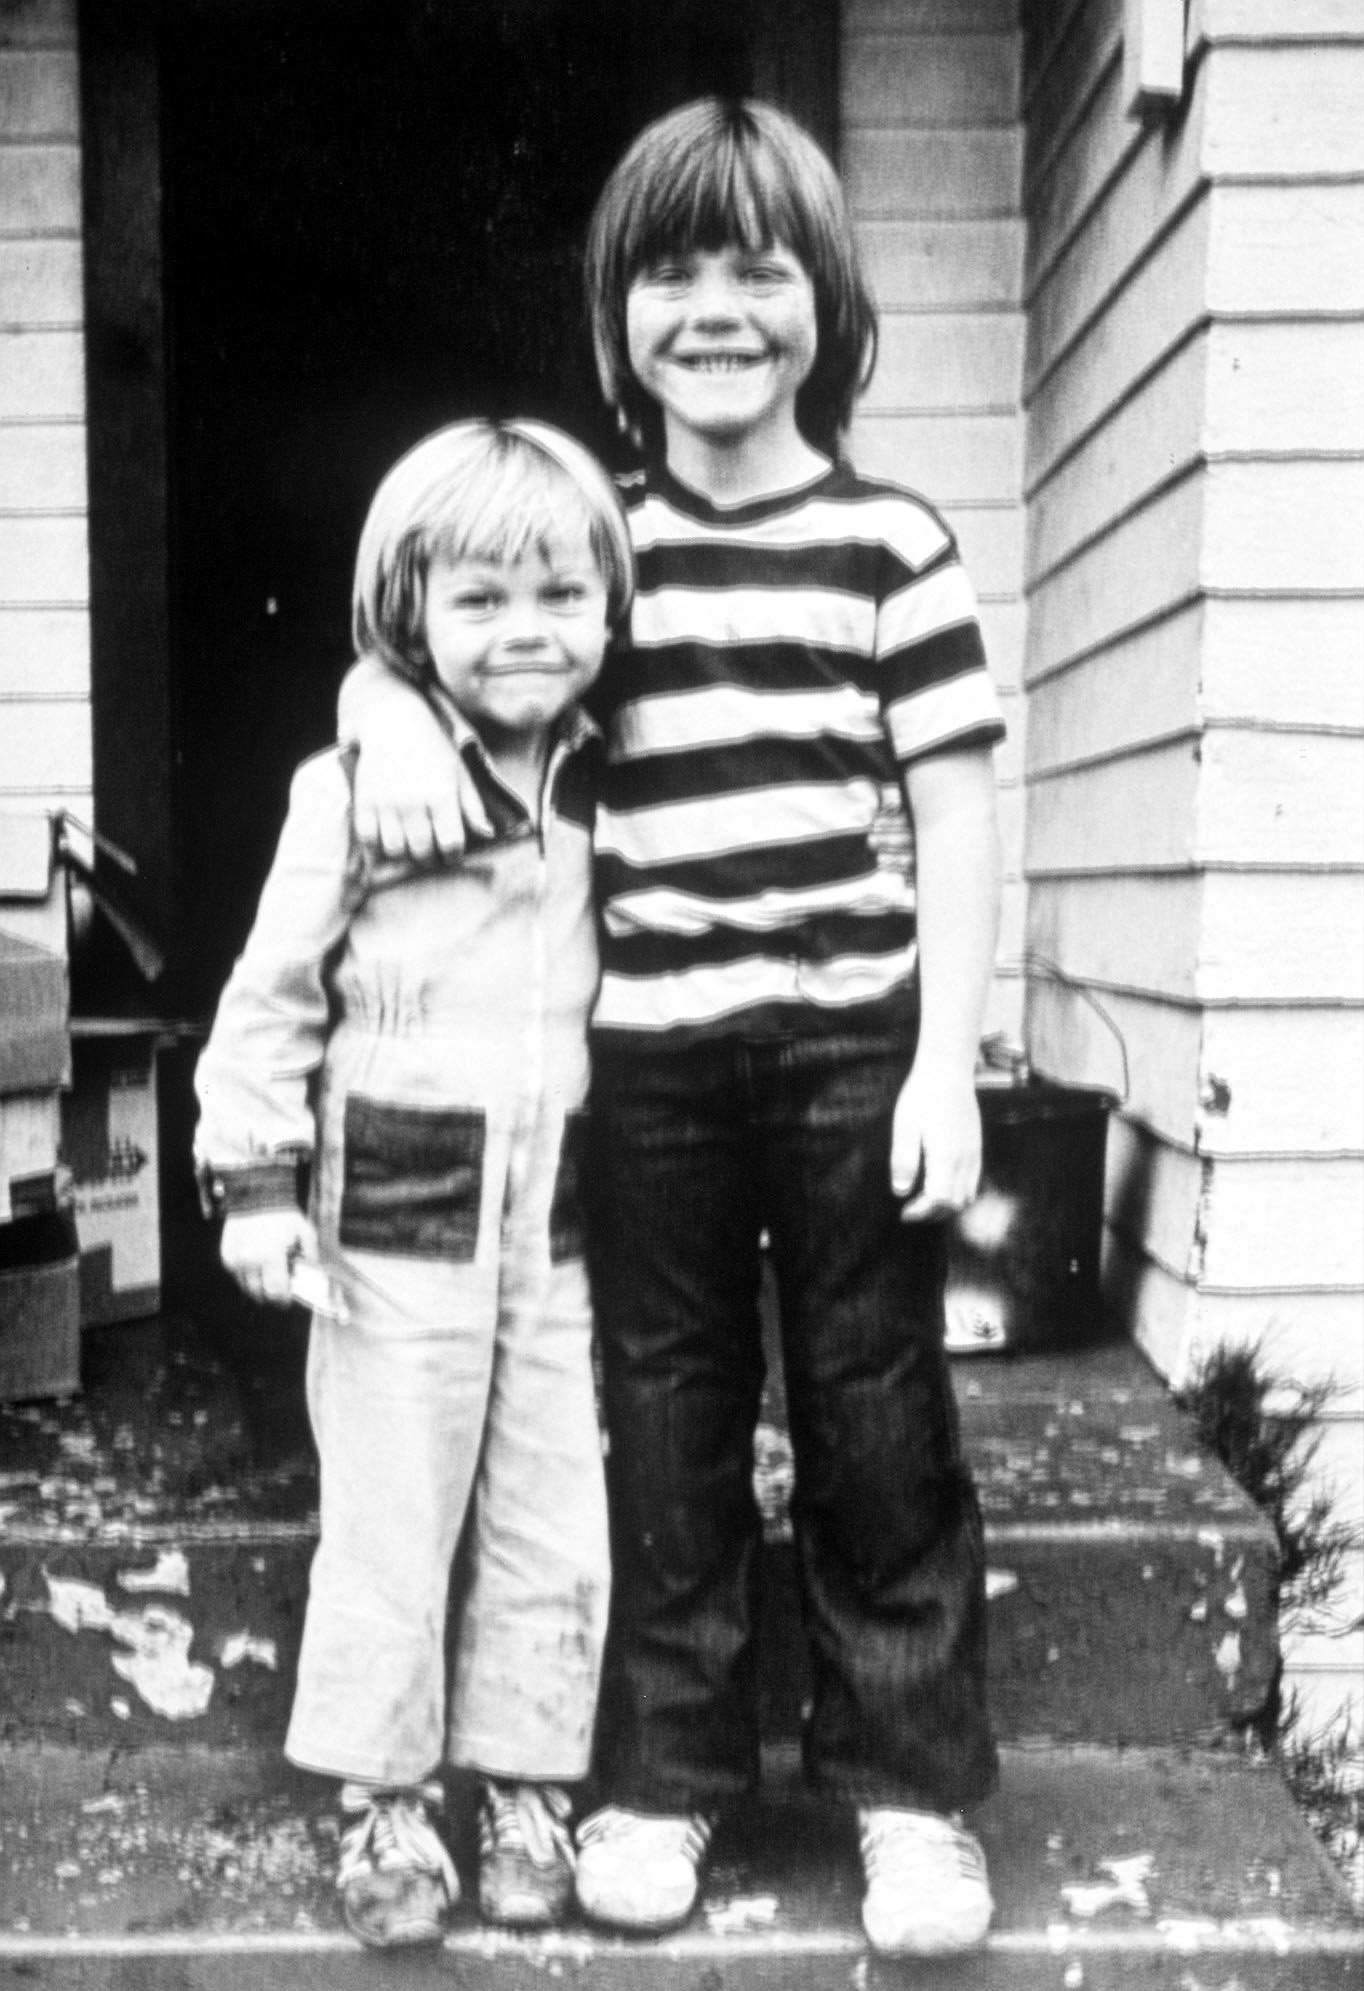 From left: Leonardo DiCaprio and his stepbrother, Adam Ferrer, in Los Angeles in 1978.